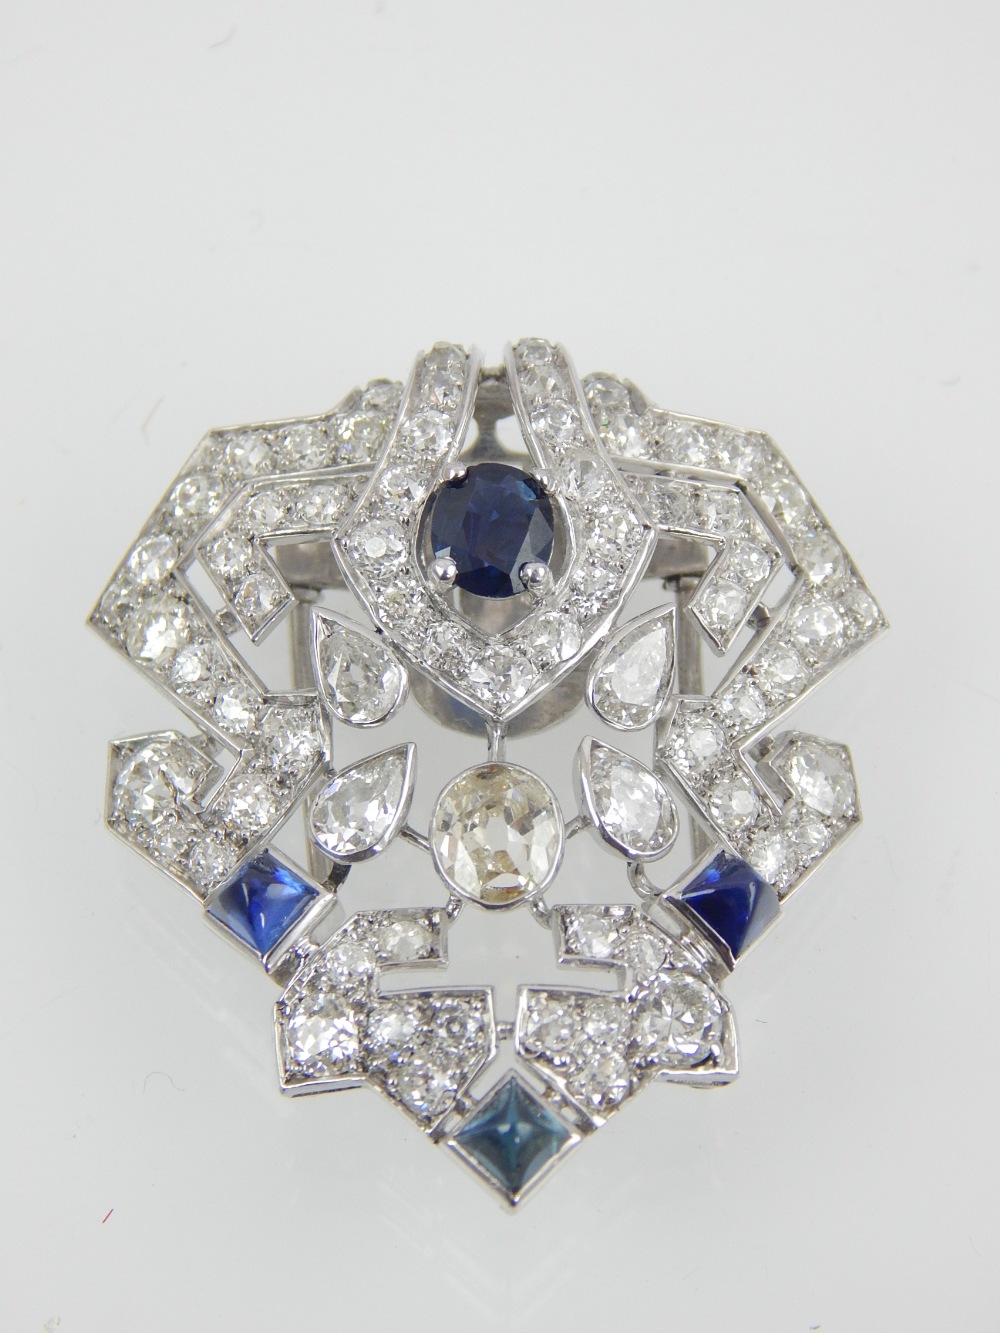 An antique Art Deco sapphire and diamond brooch in white gold circa 1920.